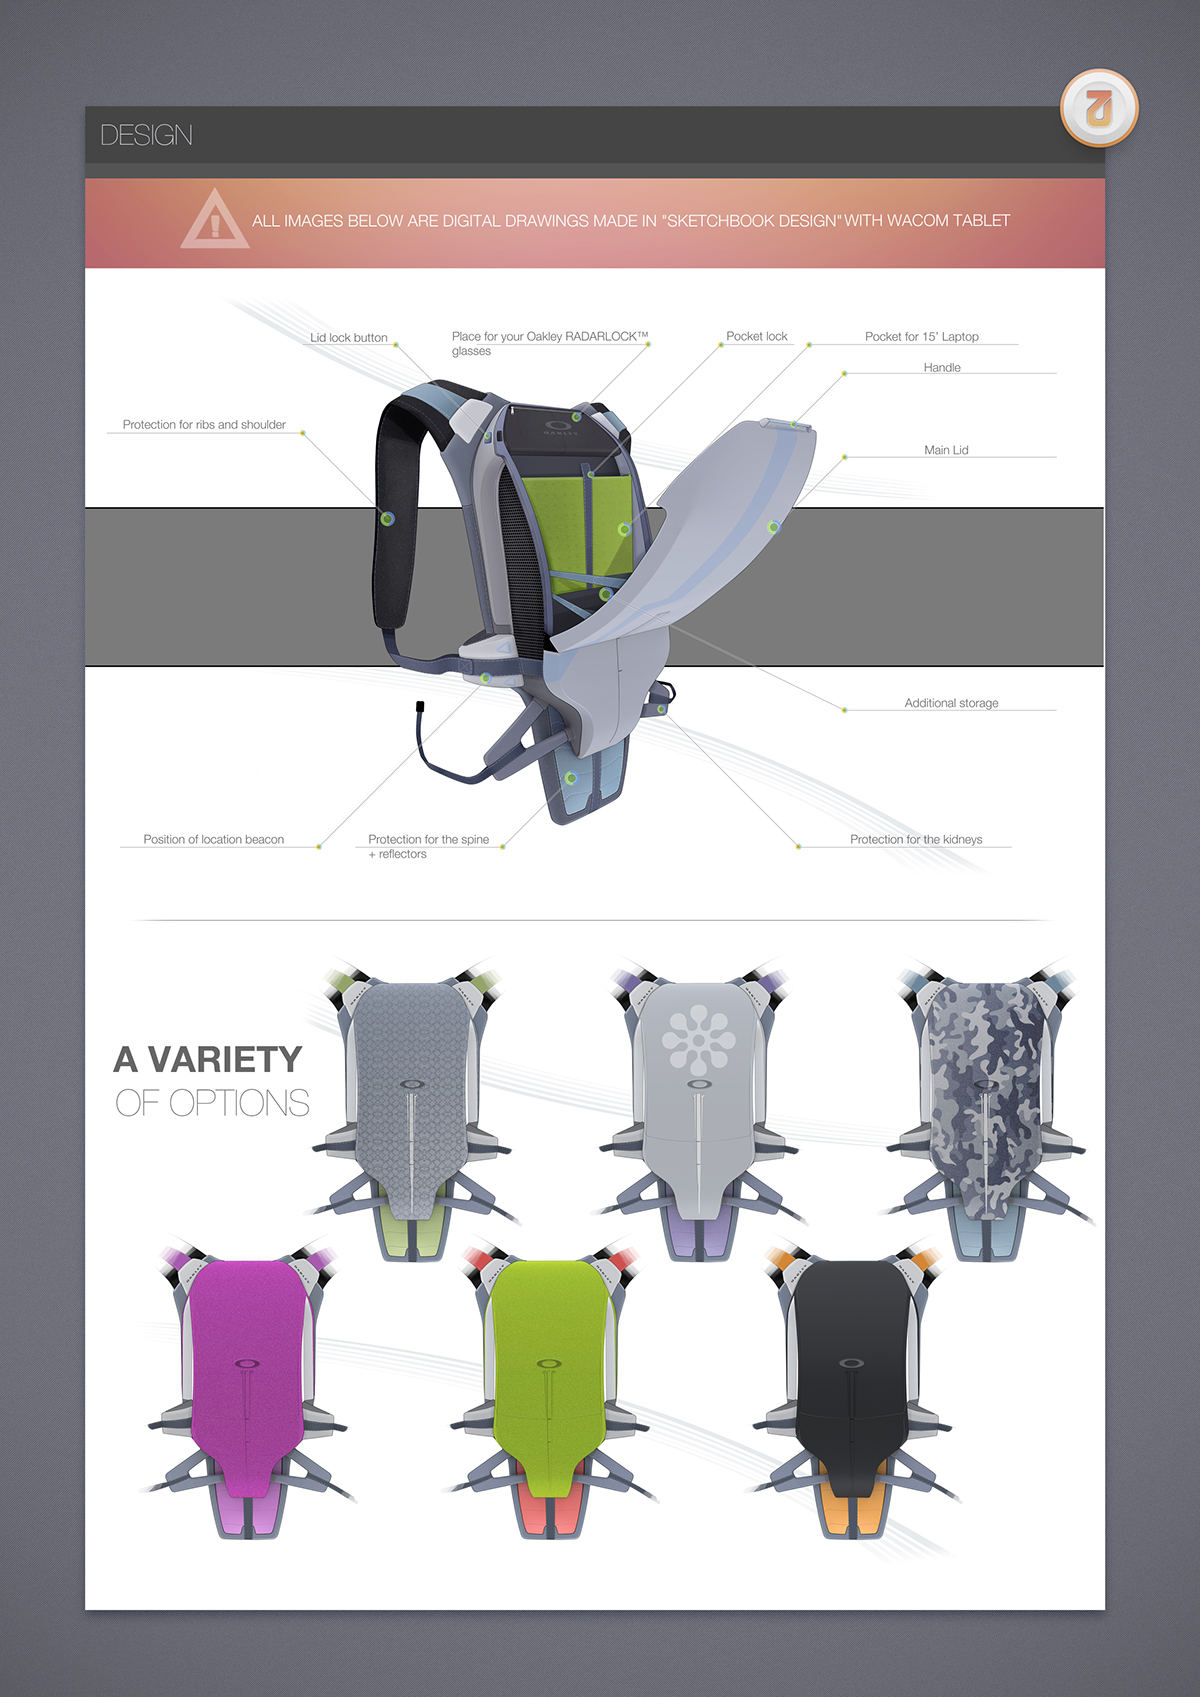 backpack oakley sketches futuristic photoshop Illustrator Render Cycling Bike riding safety D&AD award award winning